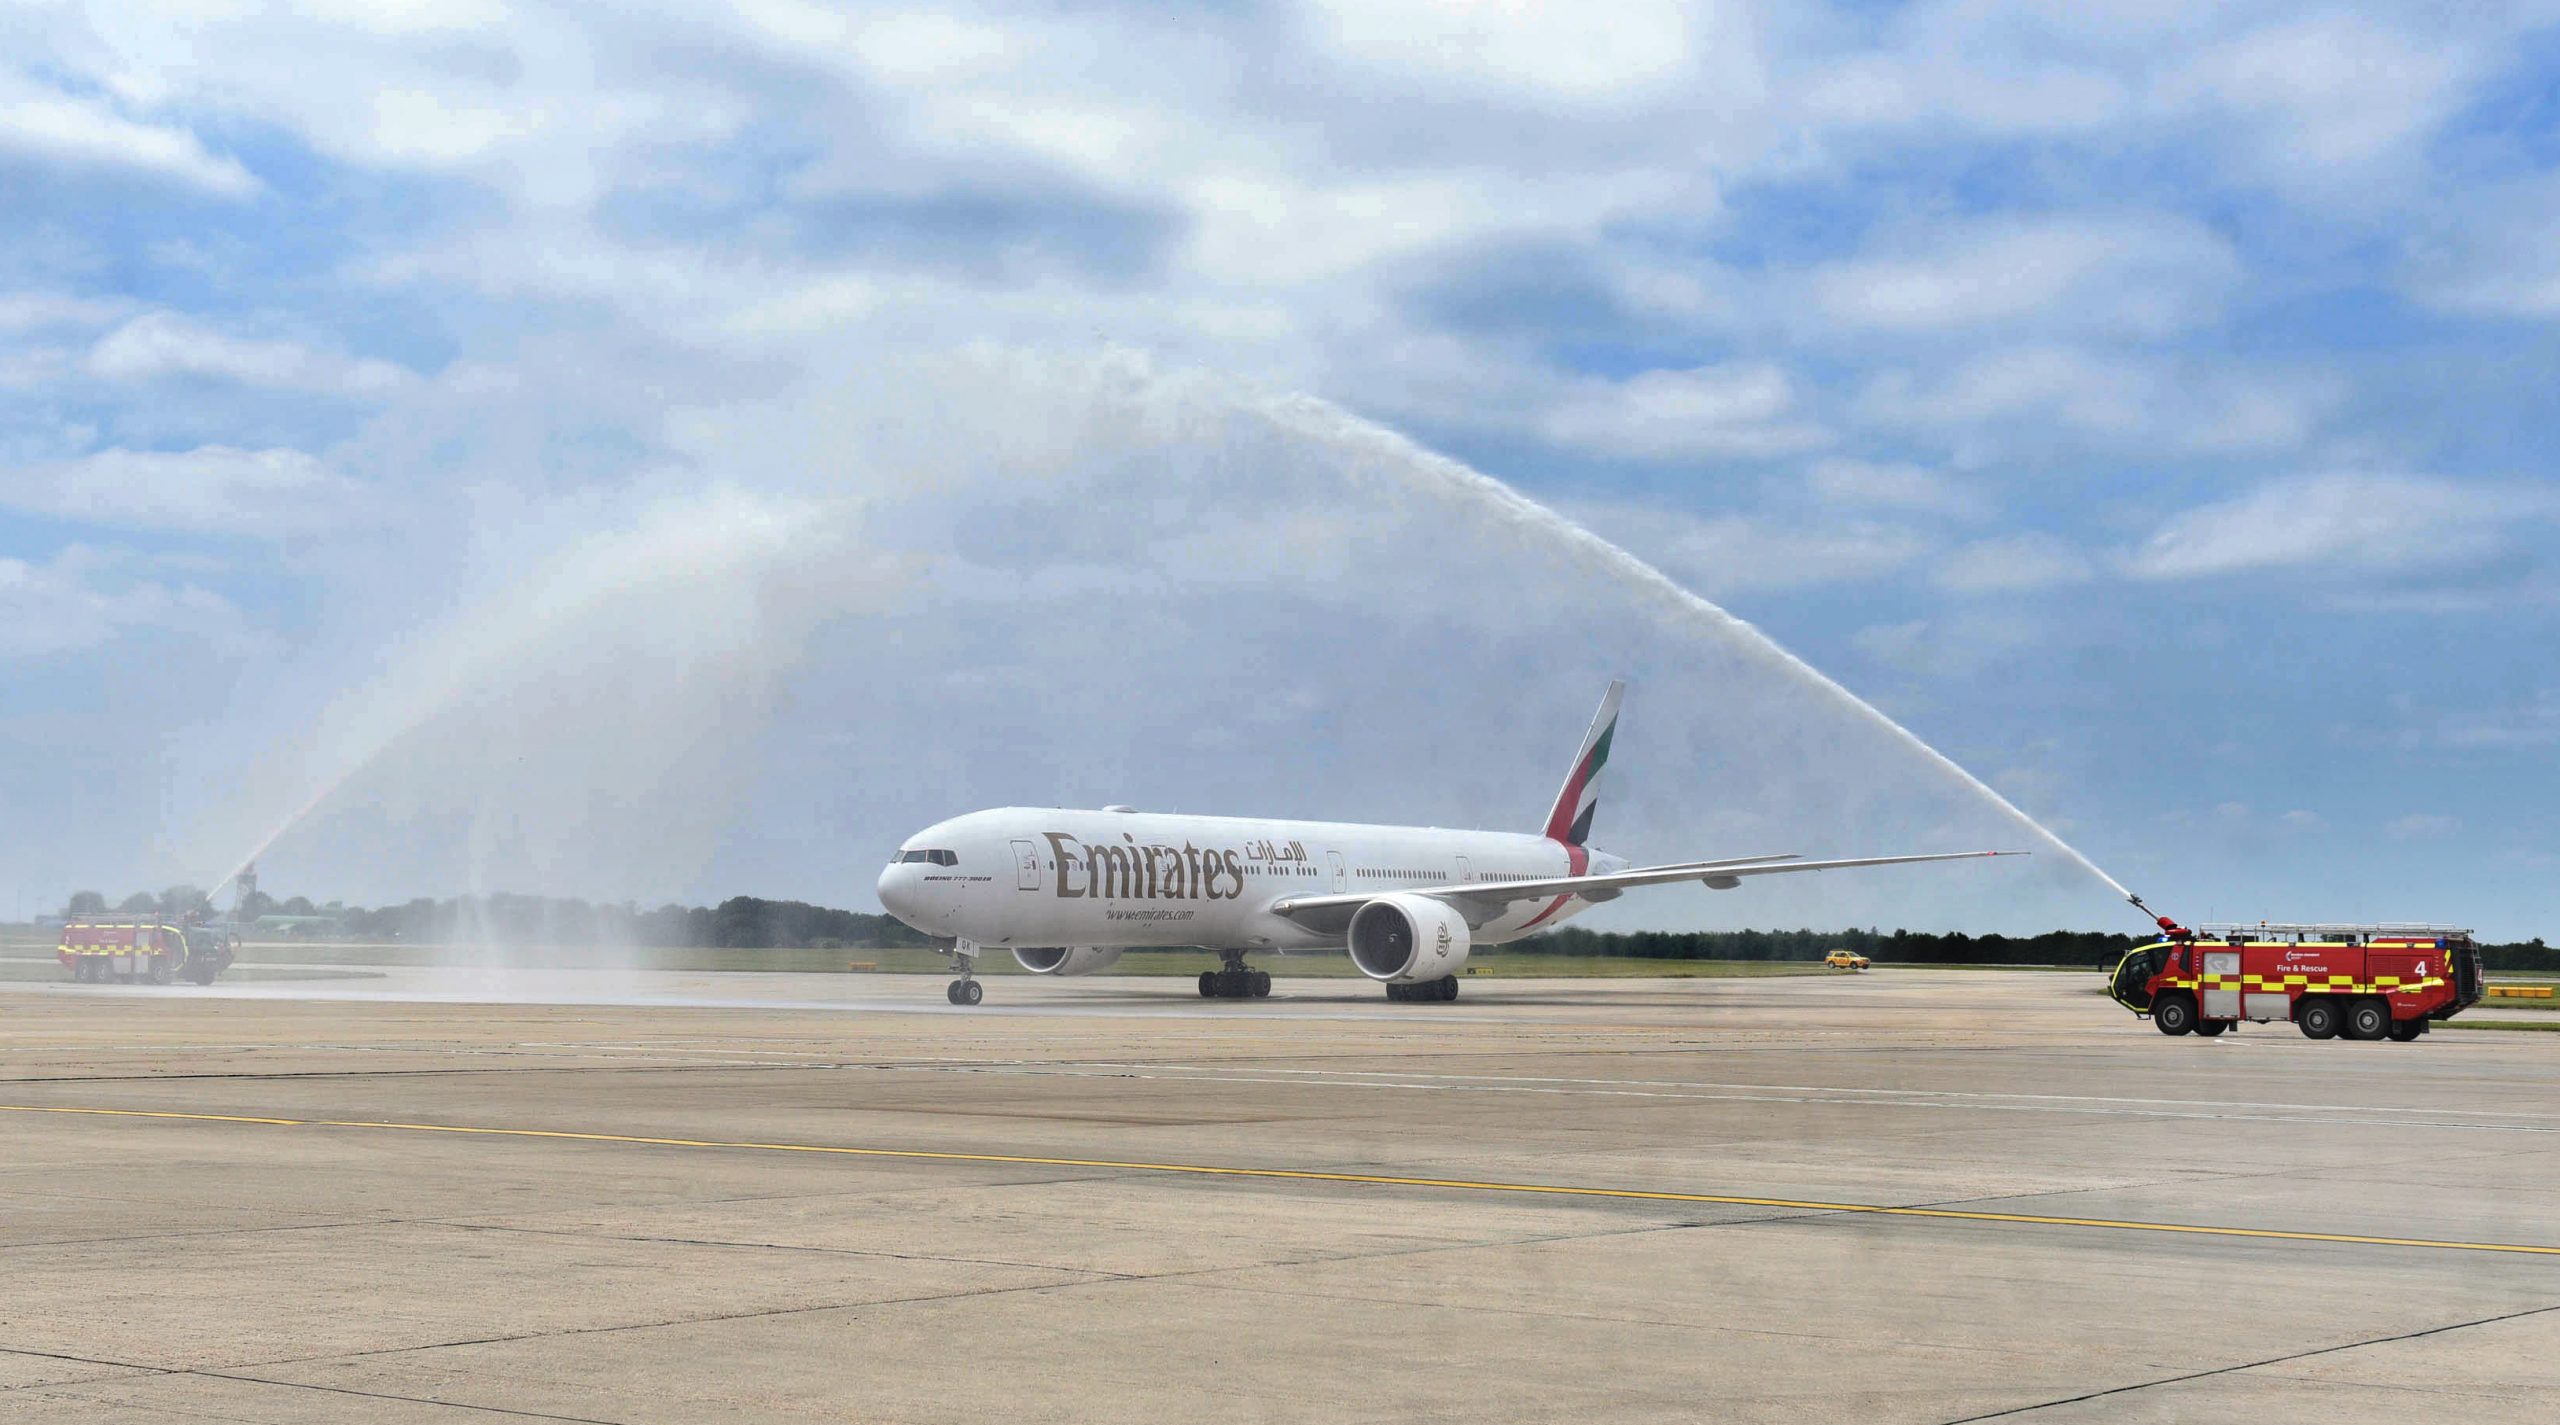 Emirates completes inaugural flight to London Stansted - The Aviator Middle East